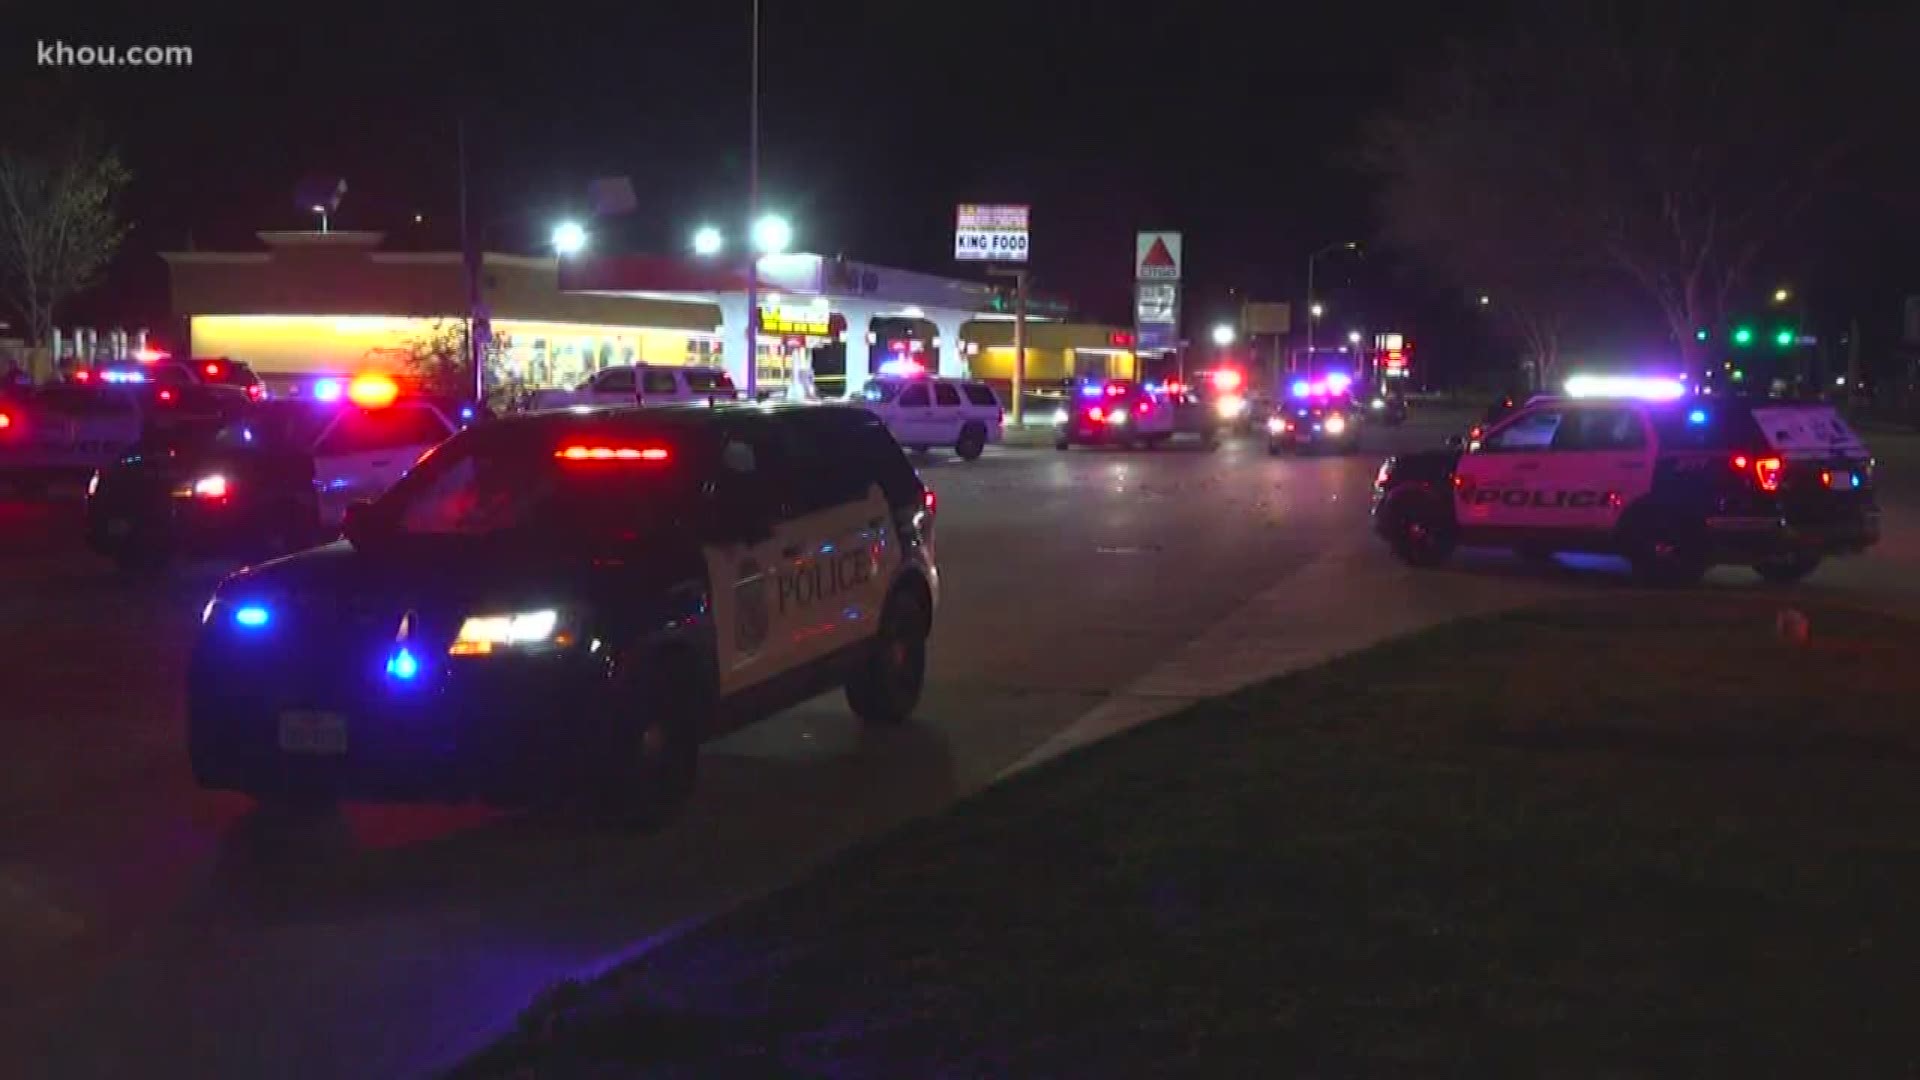 An aggravated robbery, stolen vehicle, pursuit and crash led to the fatal shooting of a suspect in southeast Houston early Monday, police said.